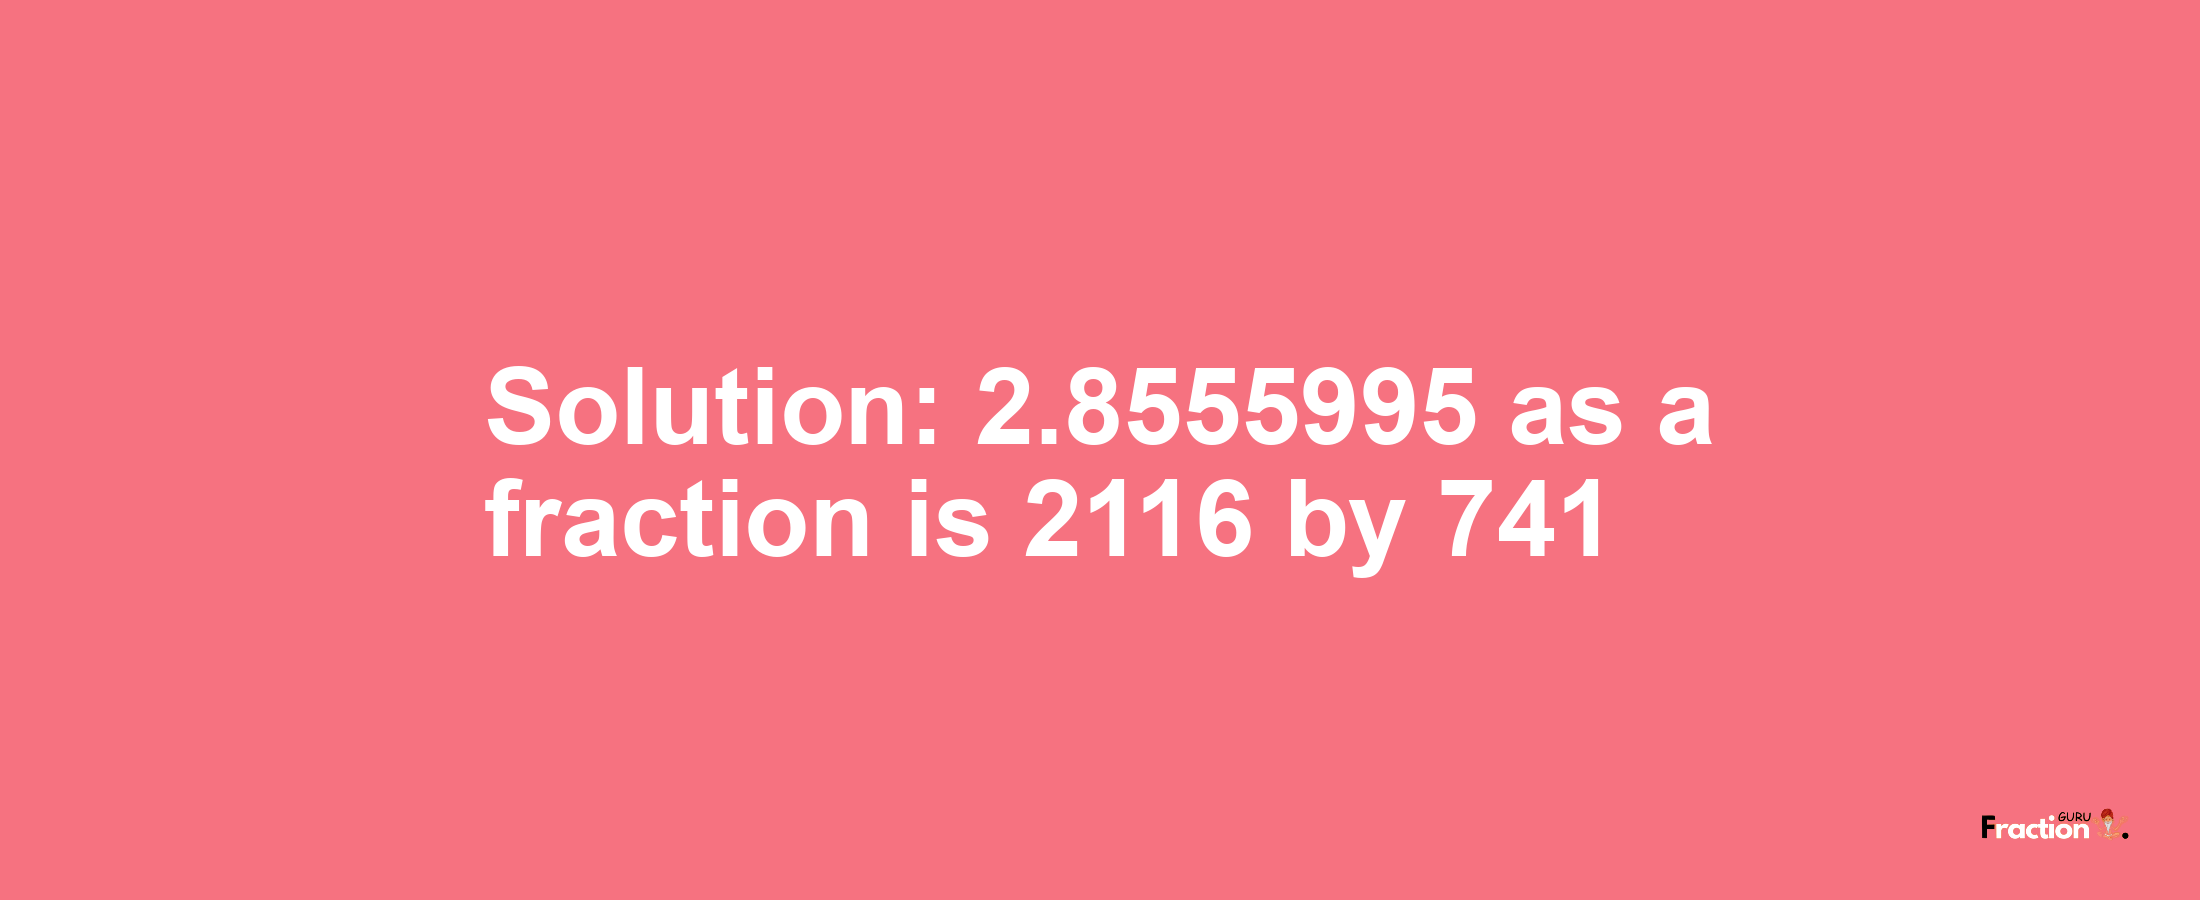 Solution:2.8555995 as a fraction is 2116/741